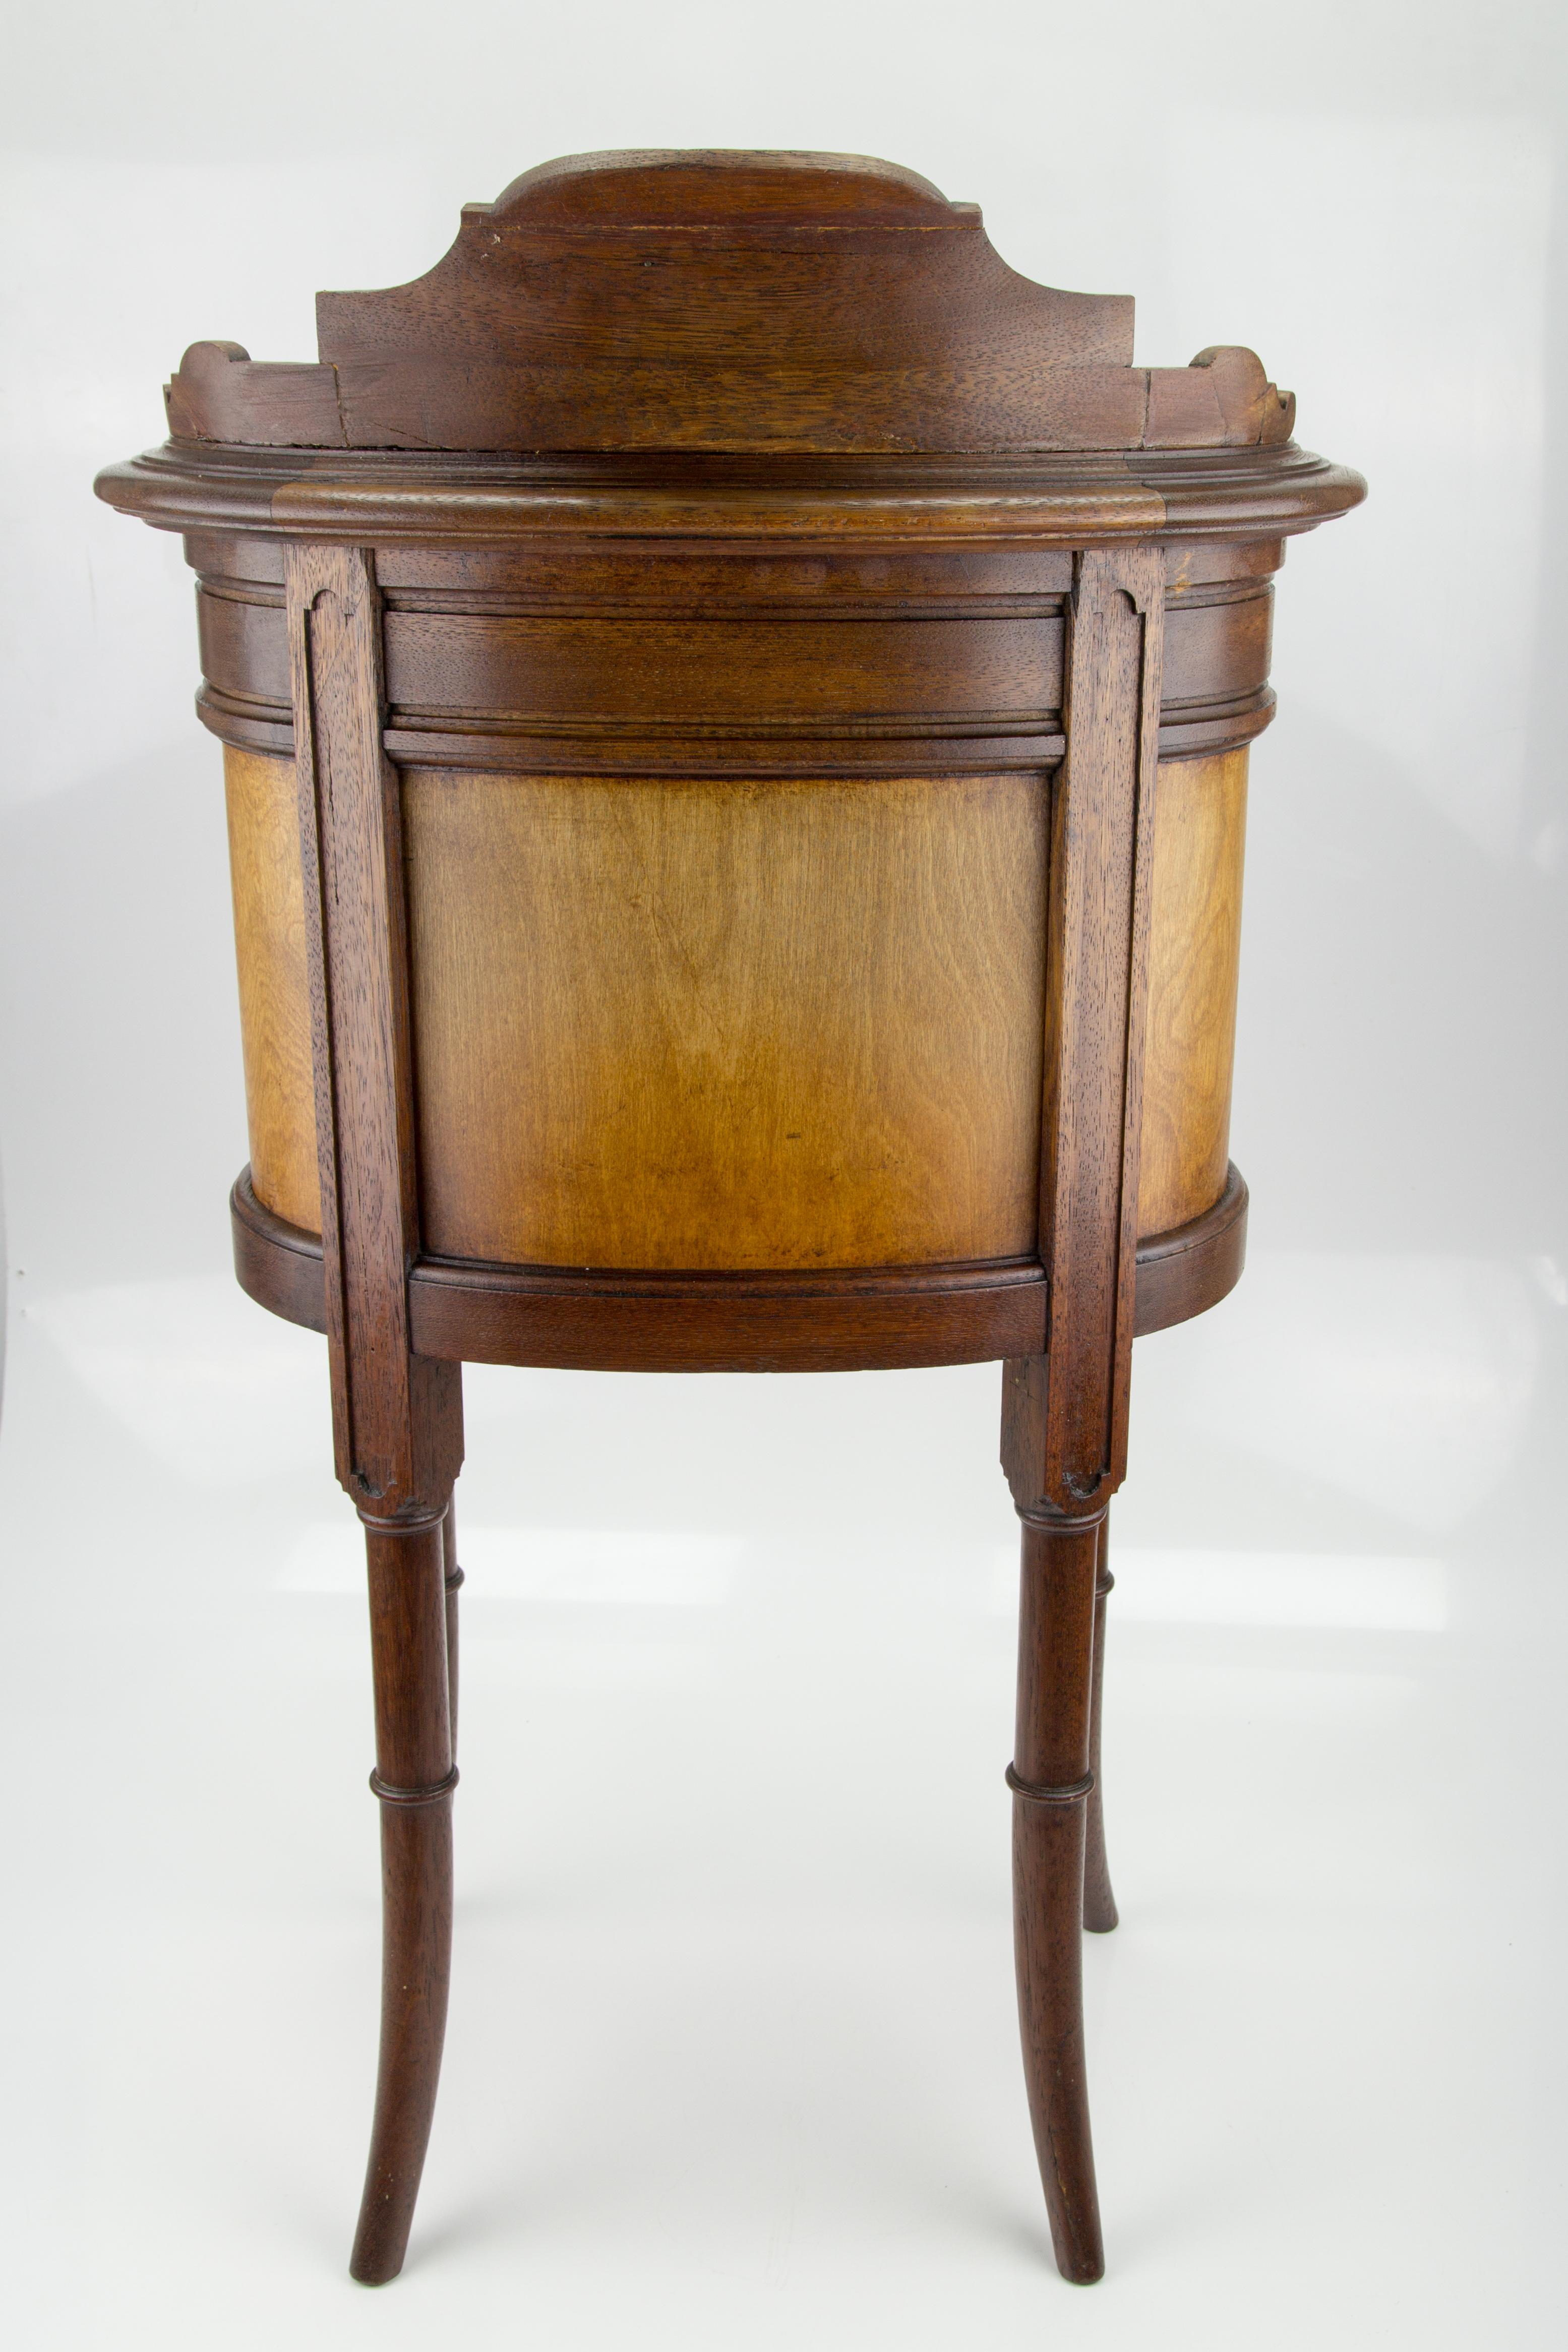 French Louis XVI Style Kidney Shaped Nightstand with Marble Top and Brass Mounts For Sale 2